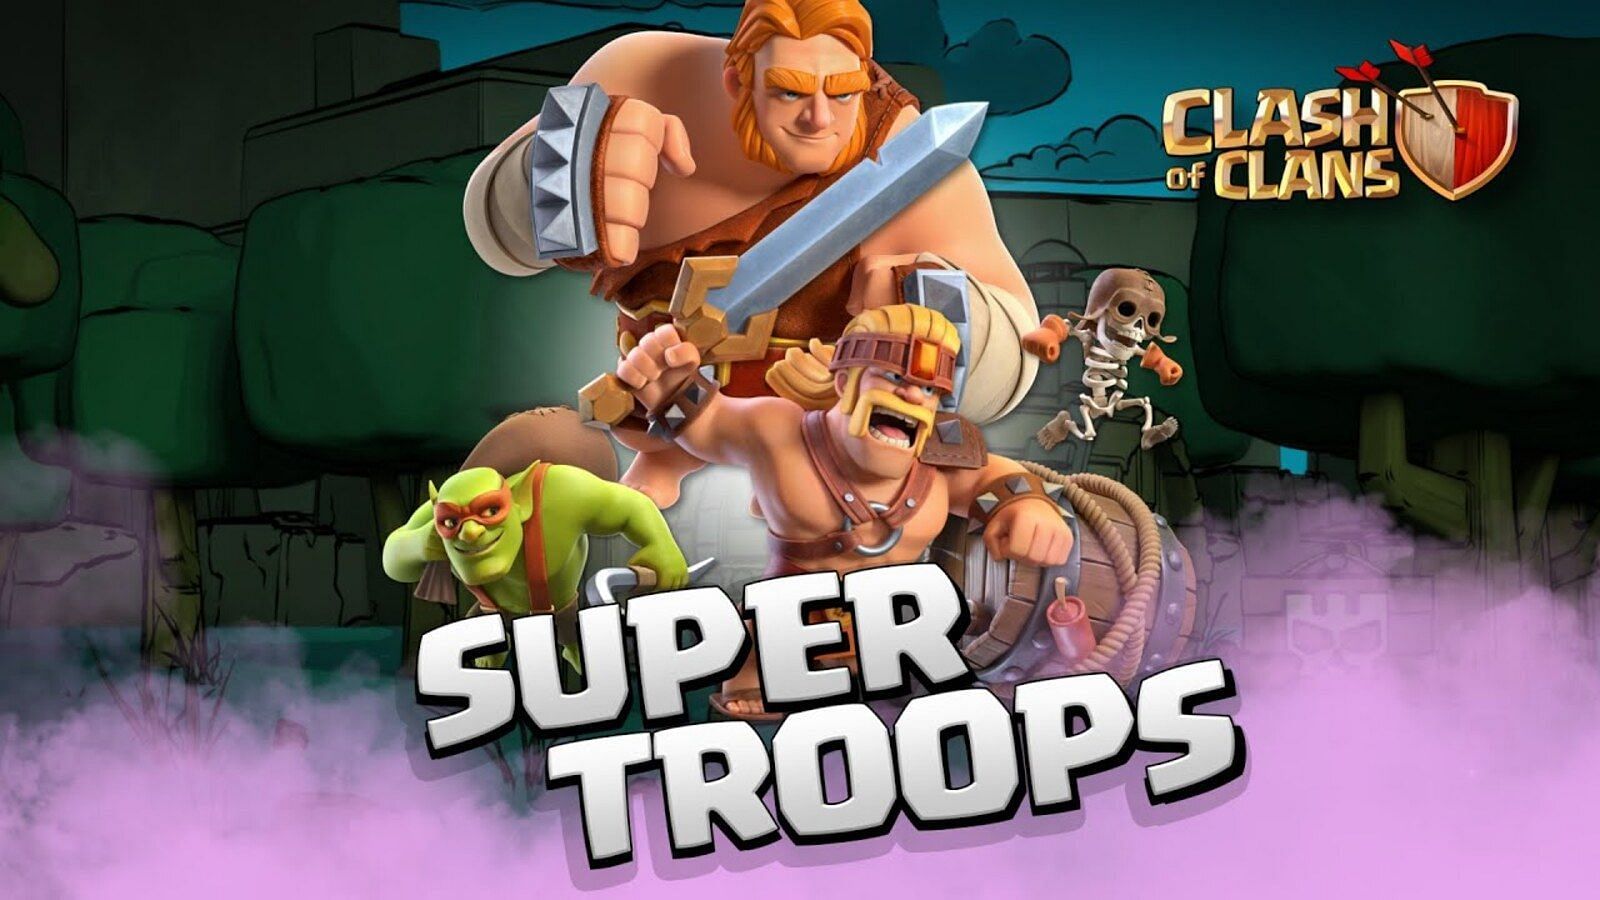 Super Troops in Clash of Clans